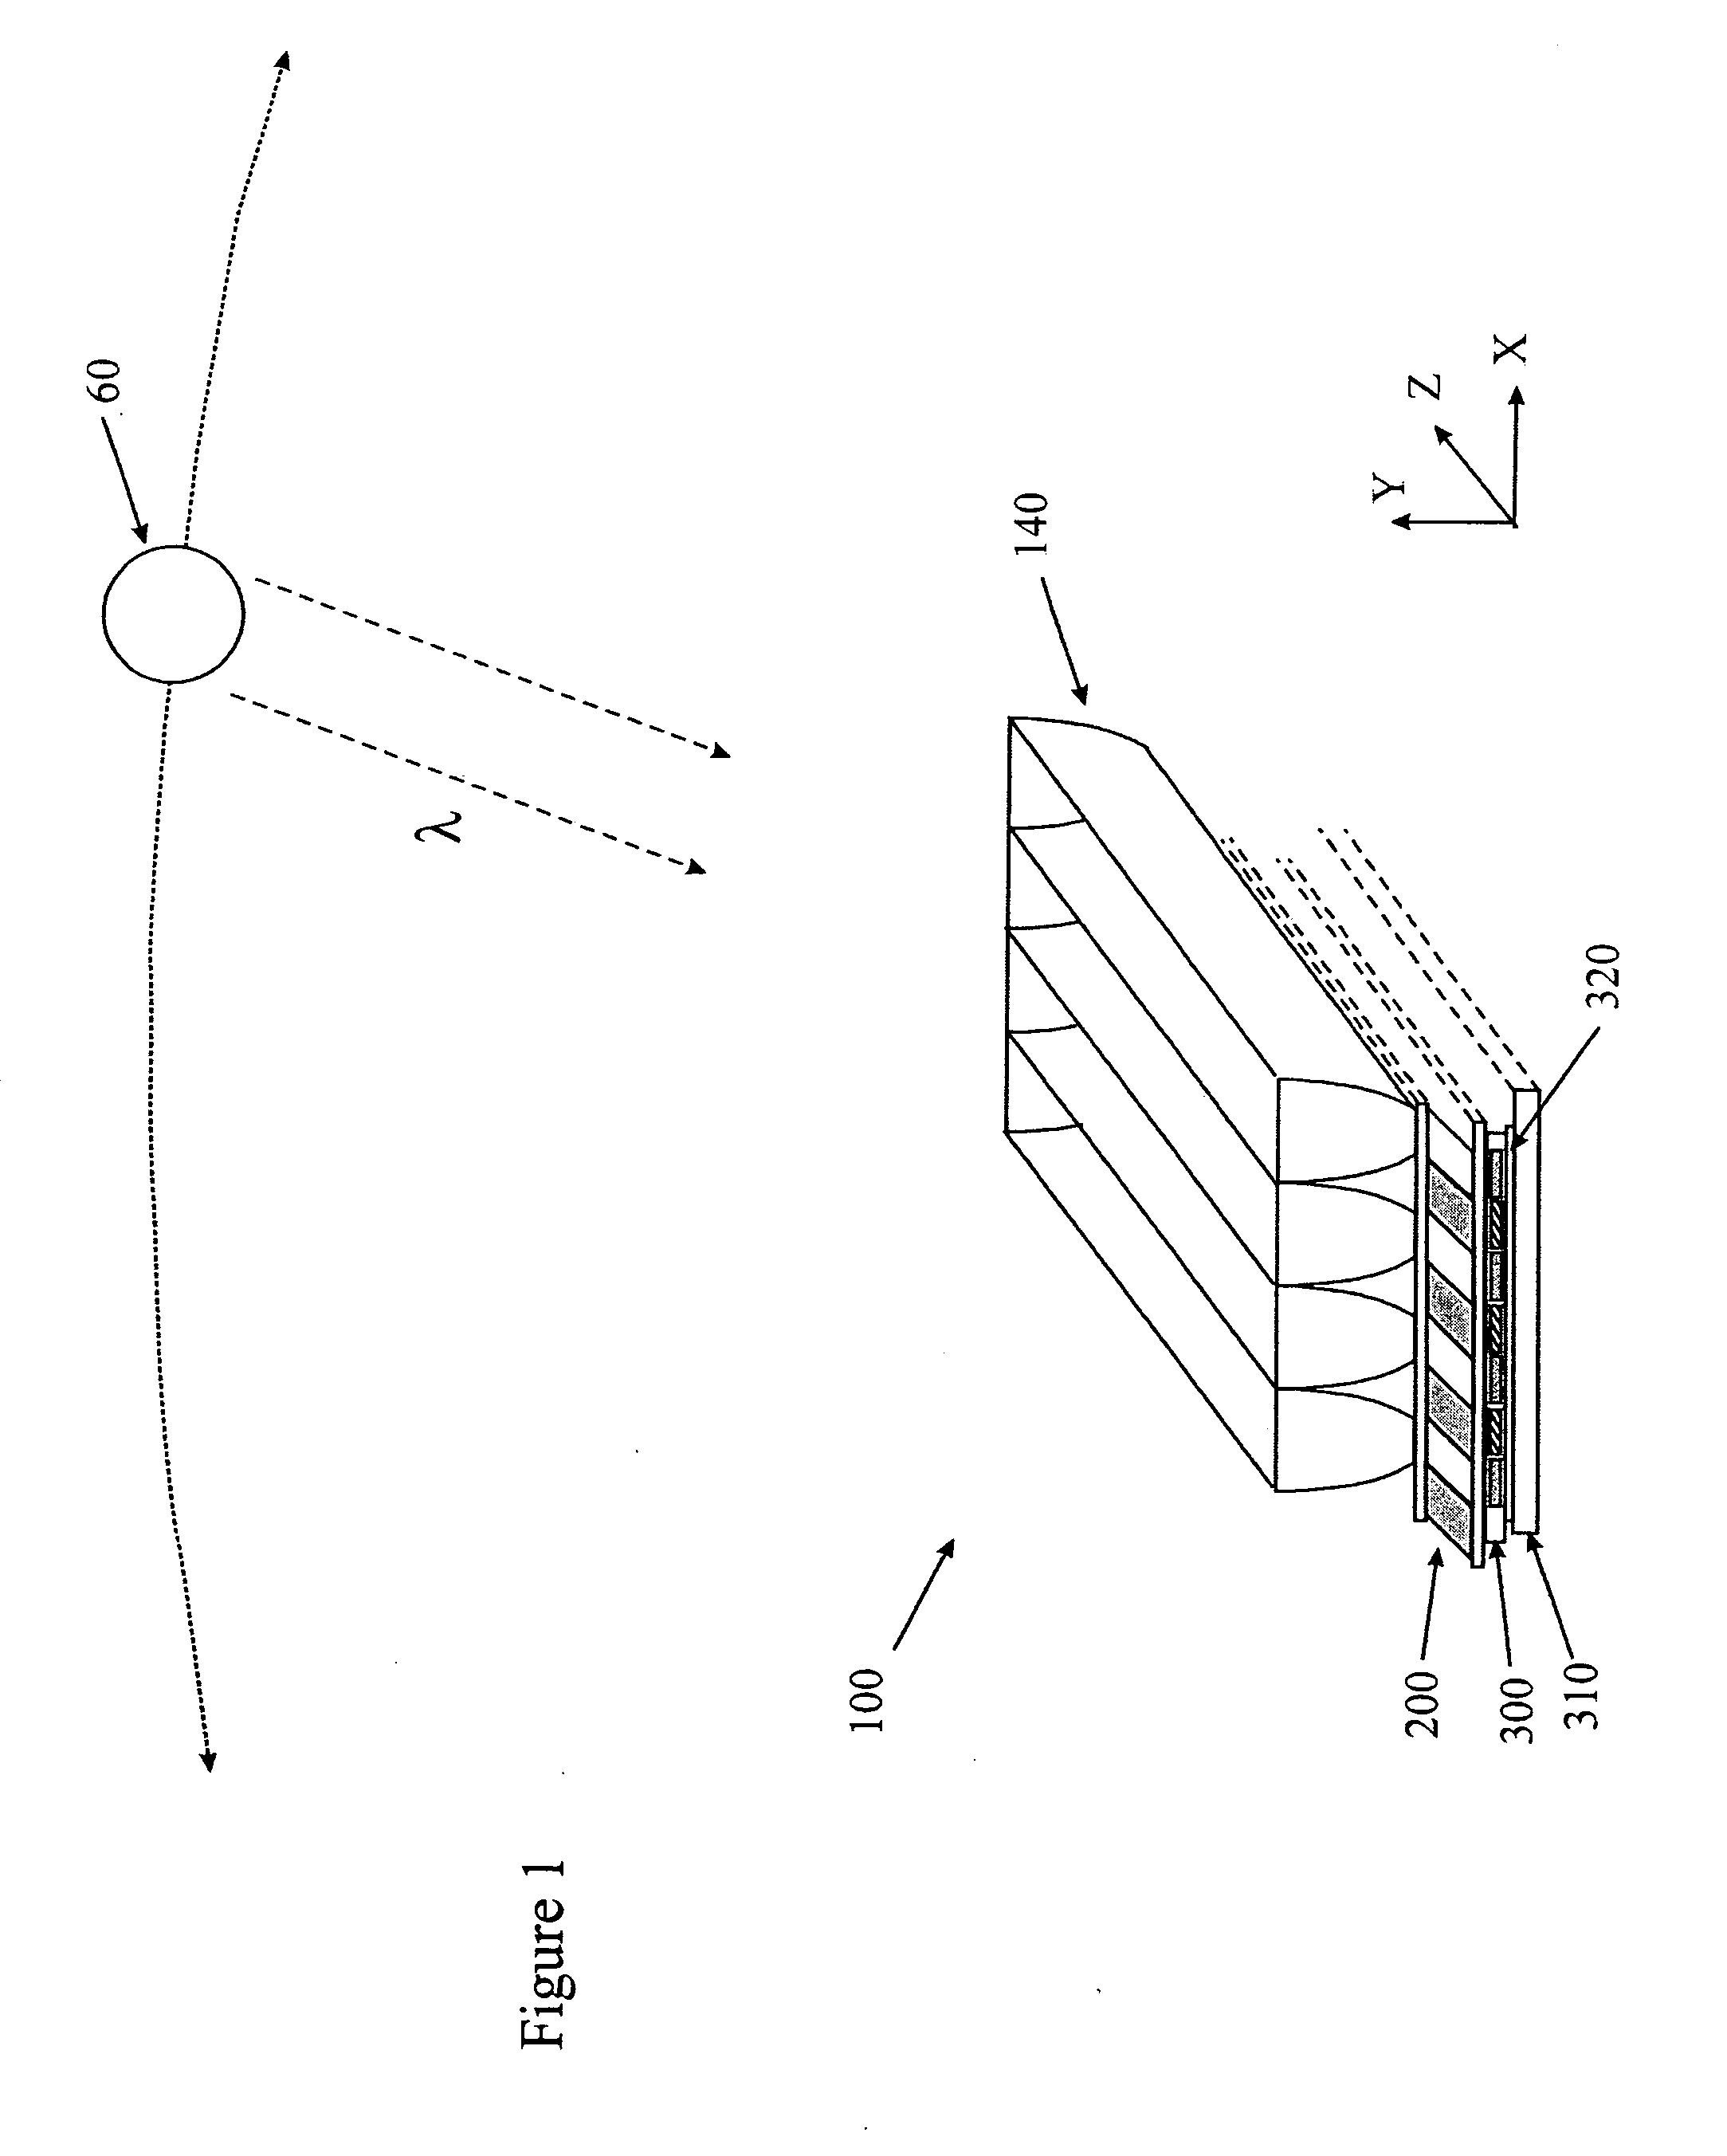 Optically enhanced multi-spectral detector structure